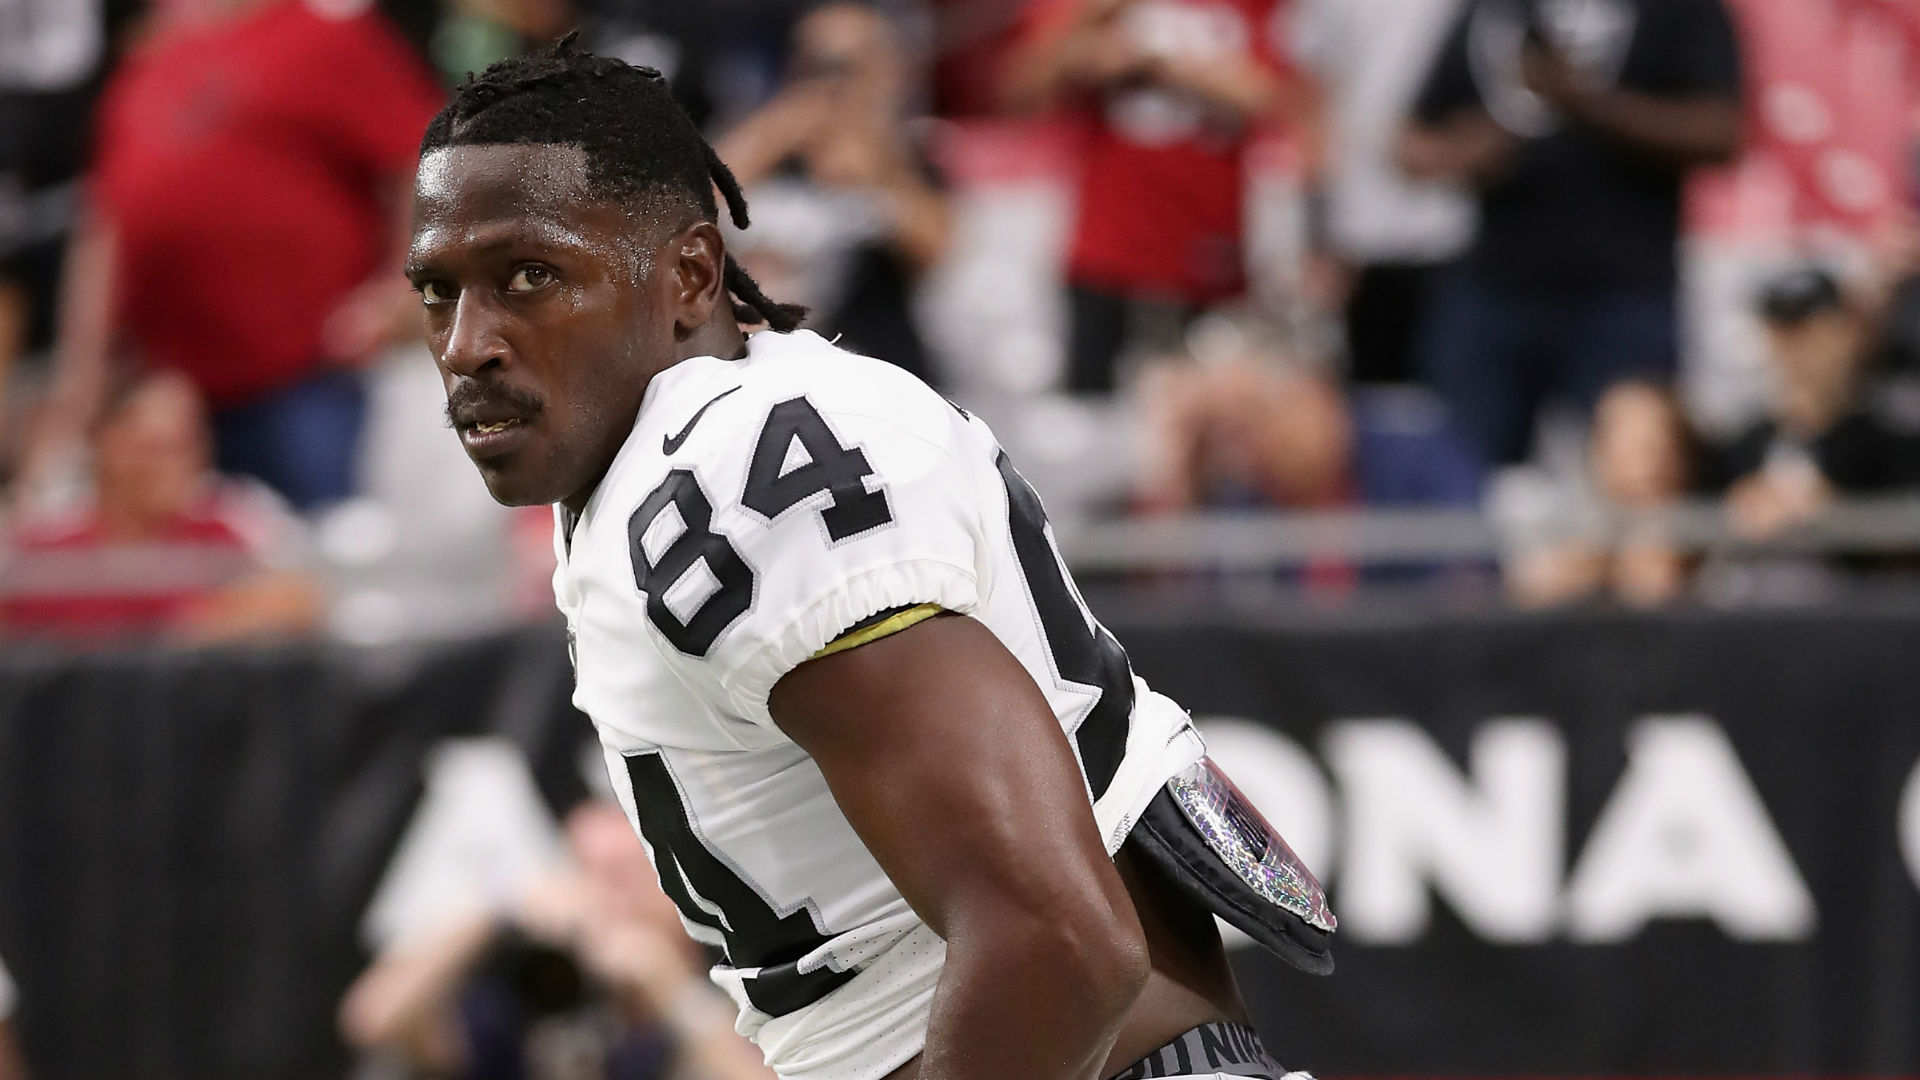 NFL news and notes: Antonio Brown practices after rape accusation; Tyreek Hill out 4-6 weeks